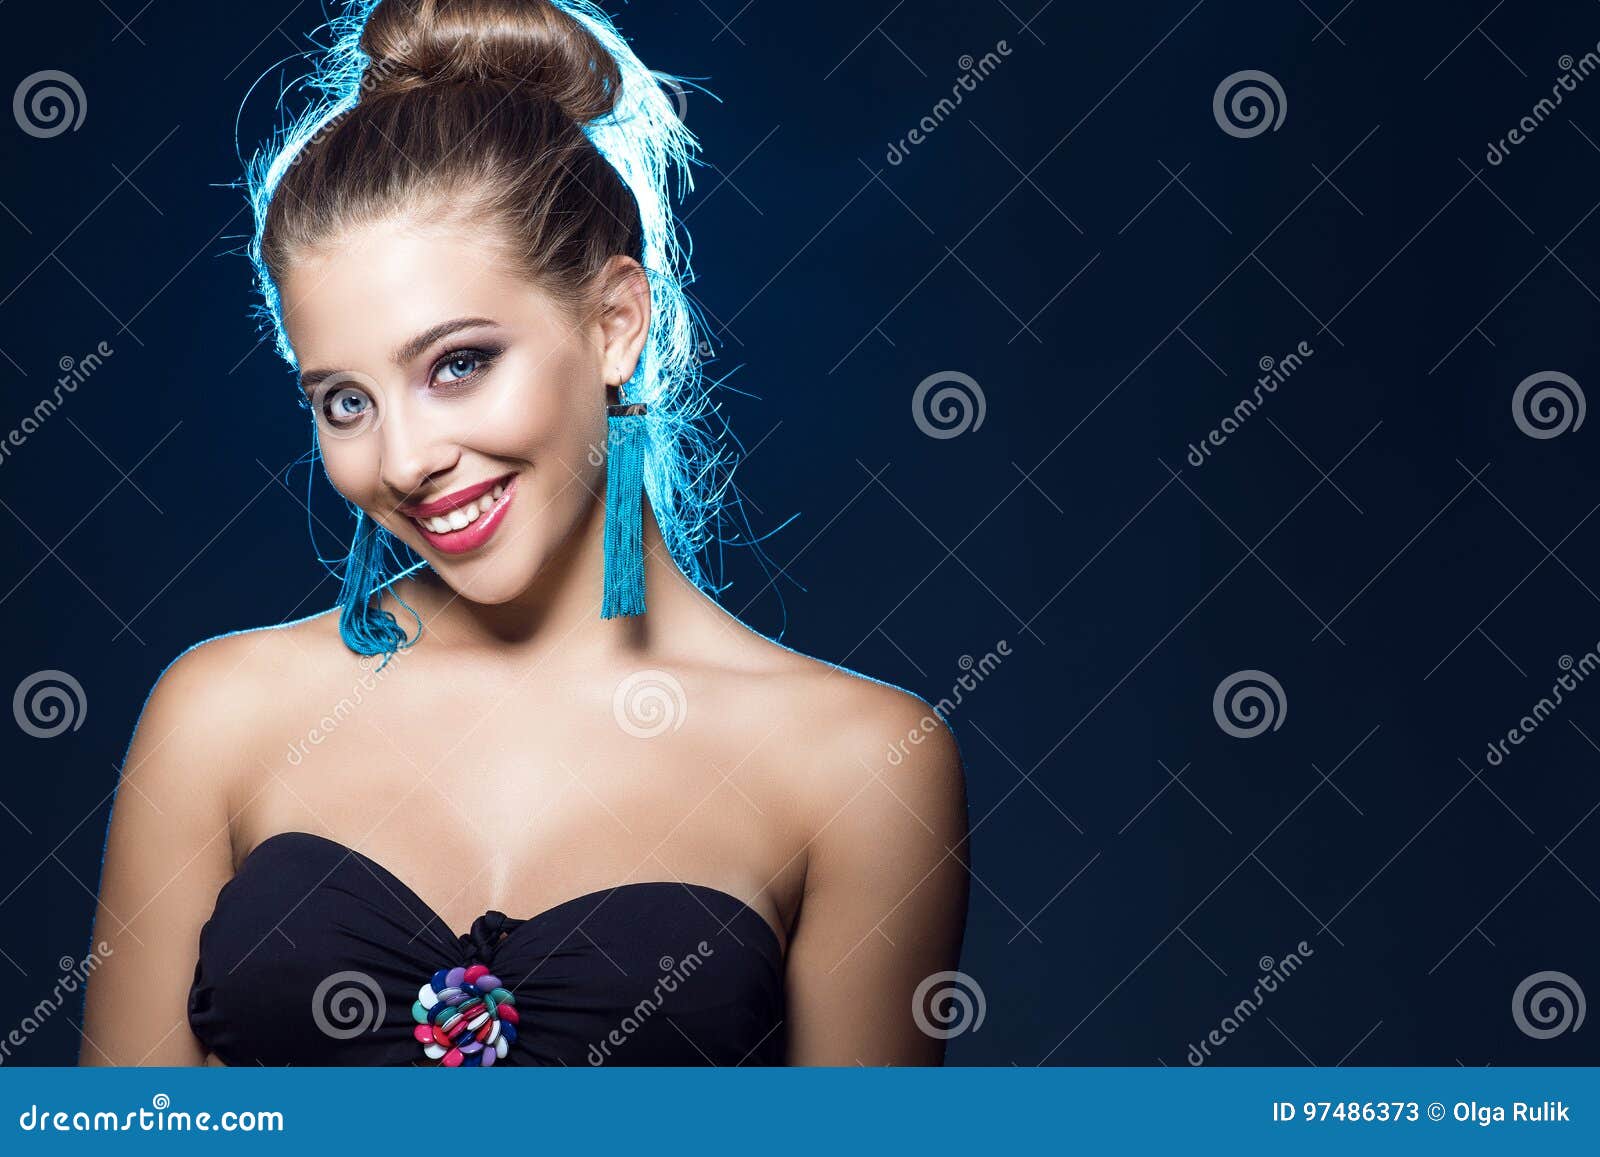 beautiful smiling blue-eyed young girl with perfect make up wearing black strapless bra and blue tassel earrings